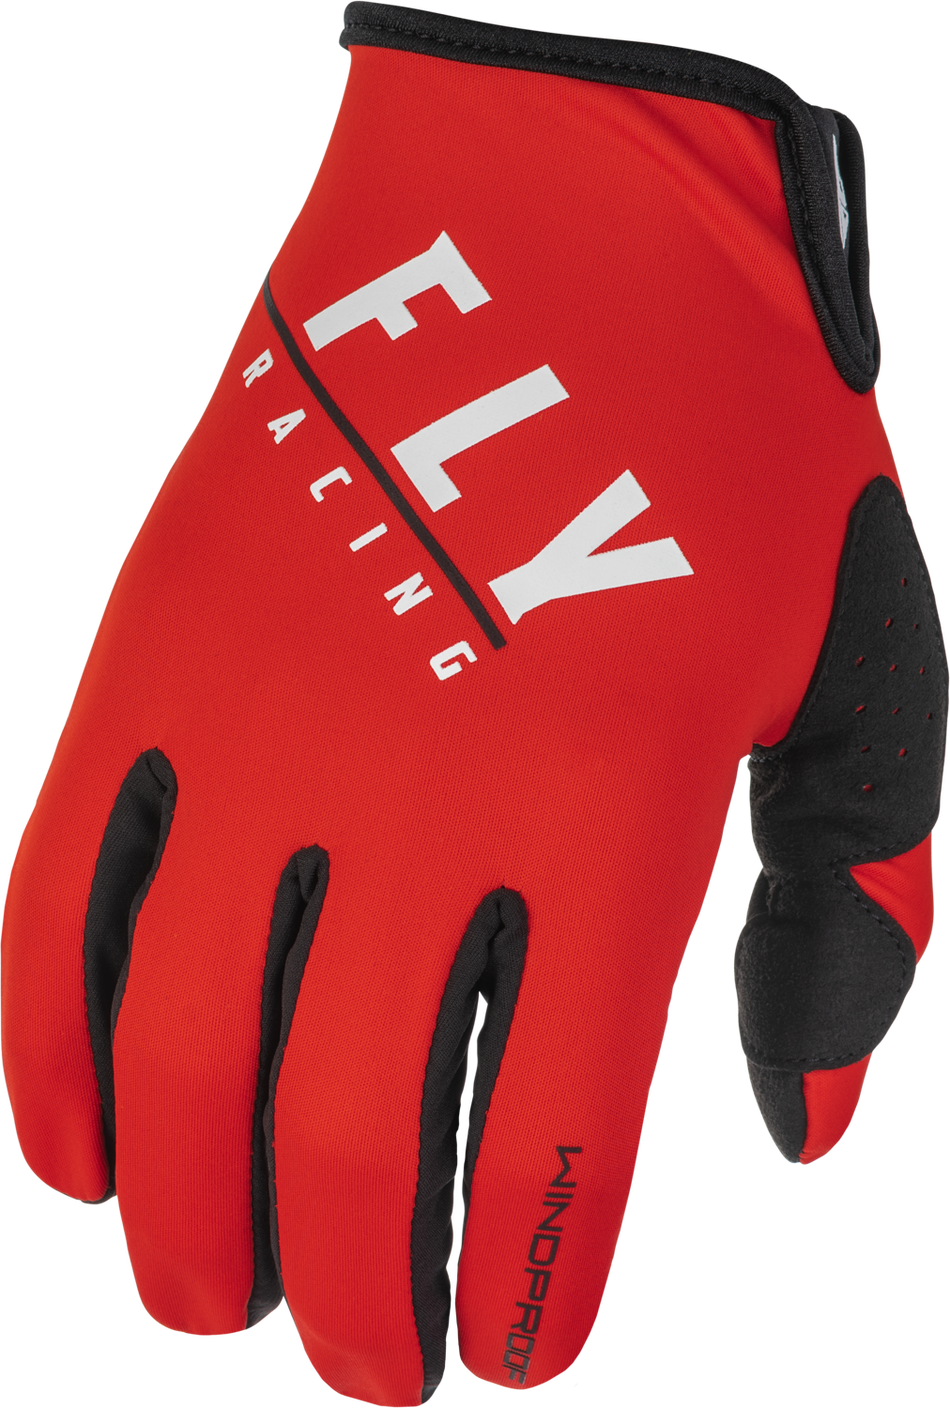 FLY RACING Windproof Gloves Black/Red Sz 11 371-14311